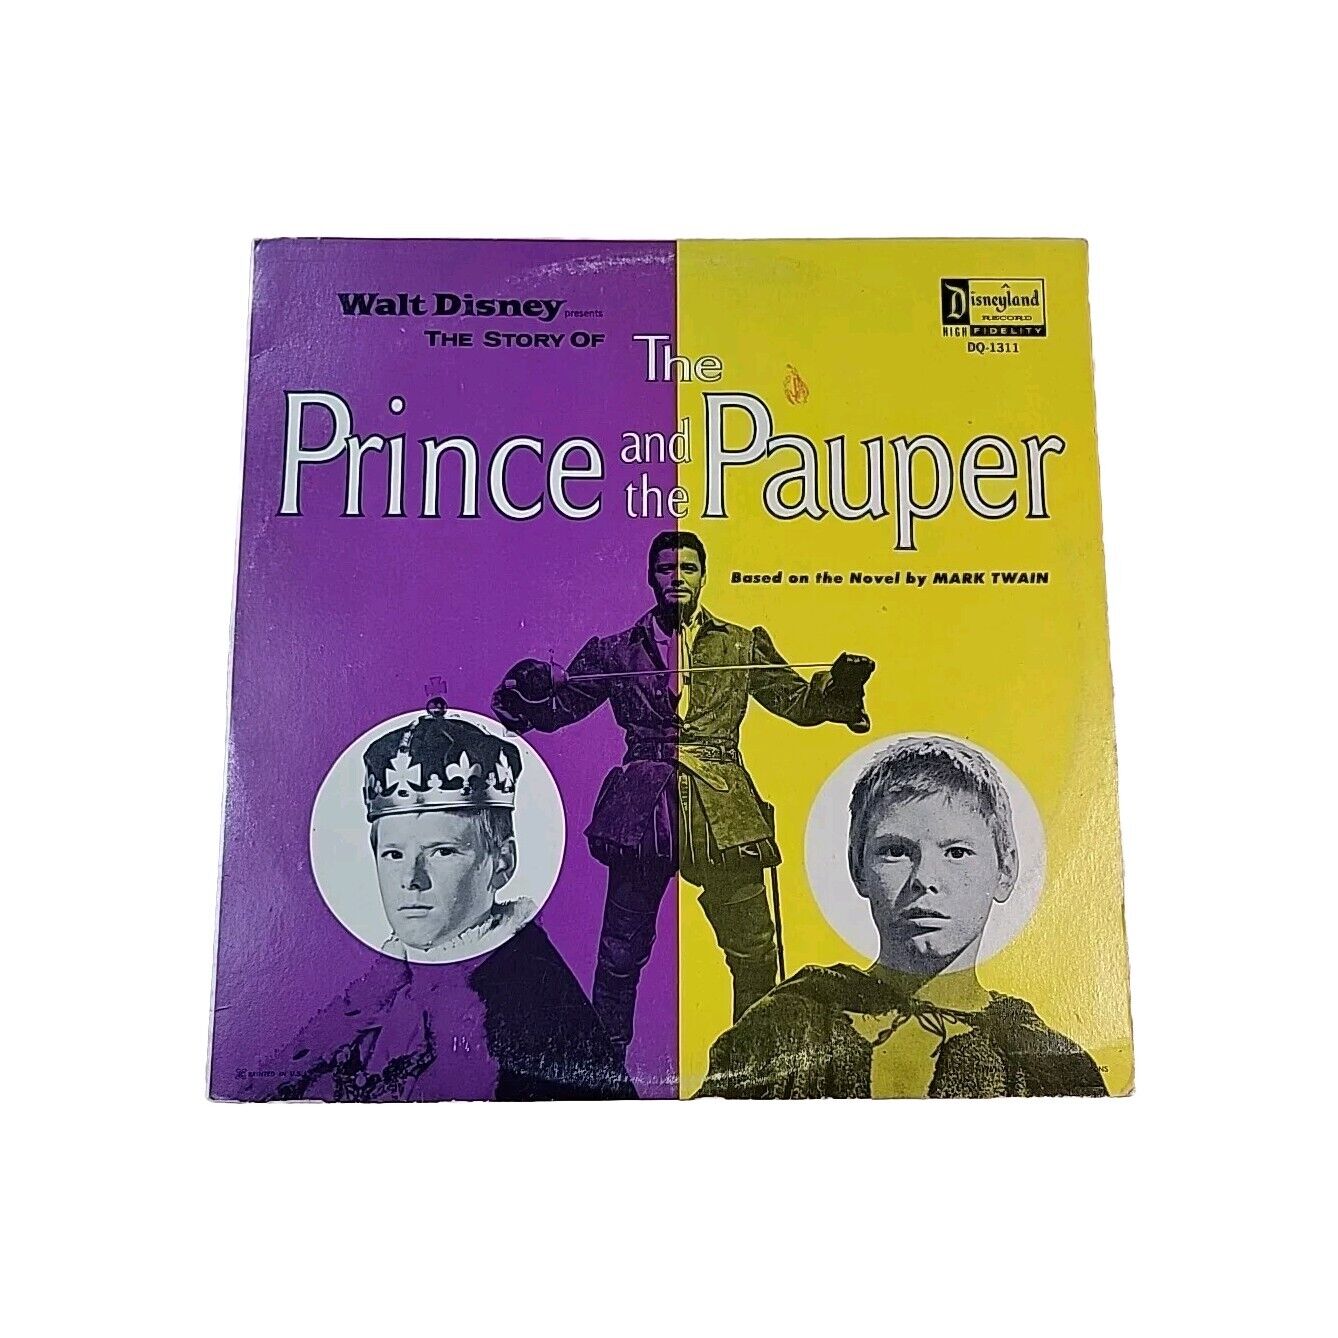 VTG Walt Disney The Prince And The Pauper LP Record 1963